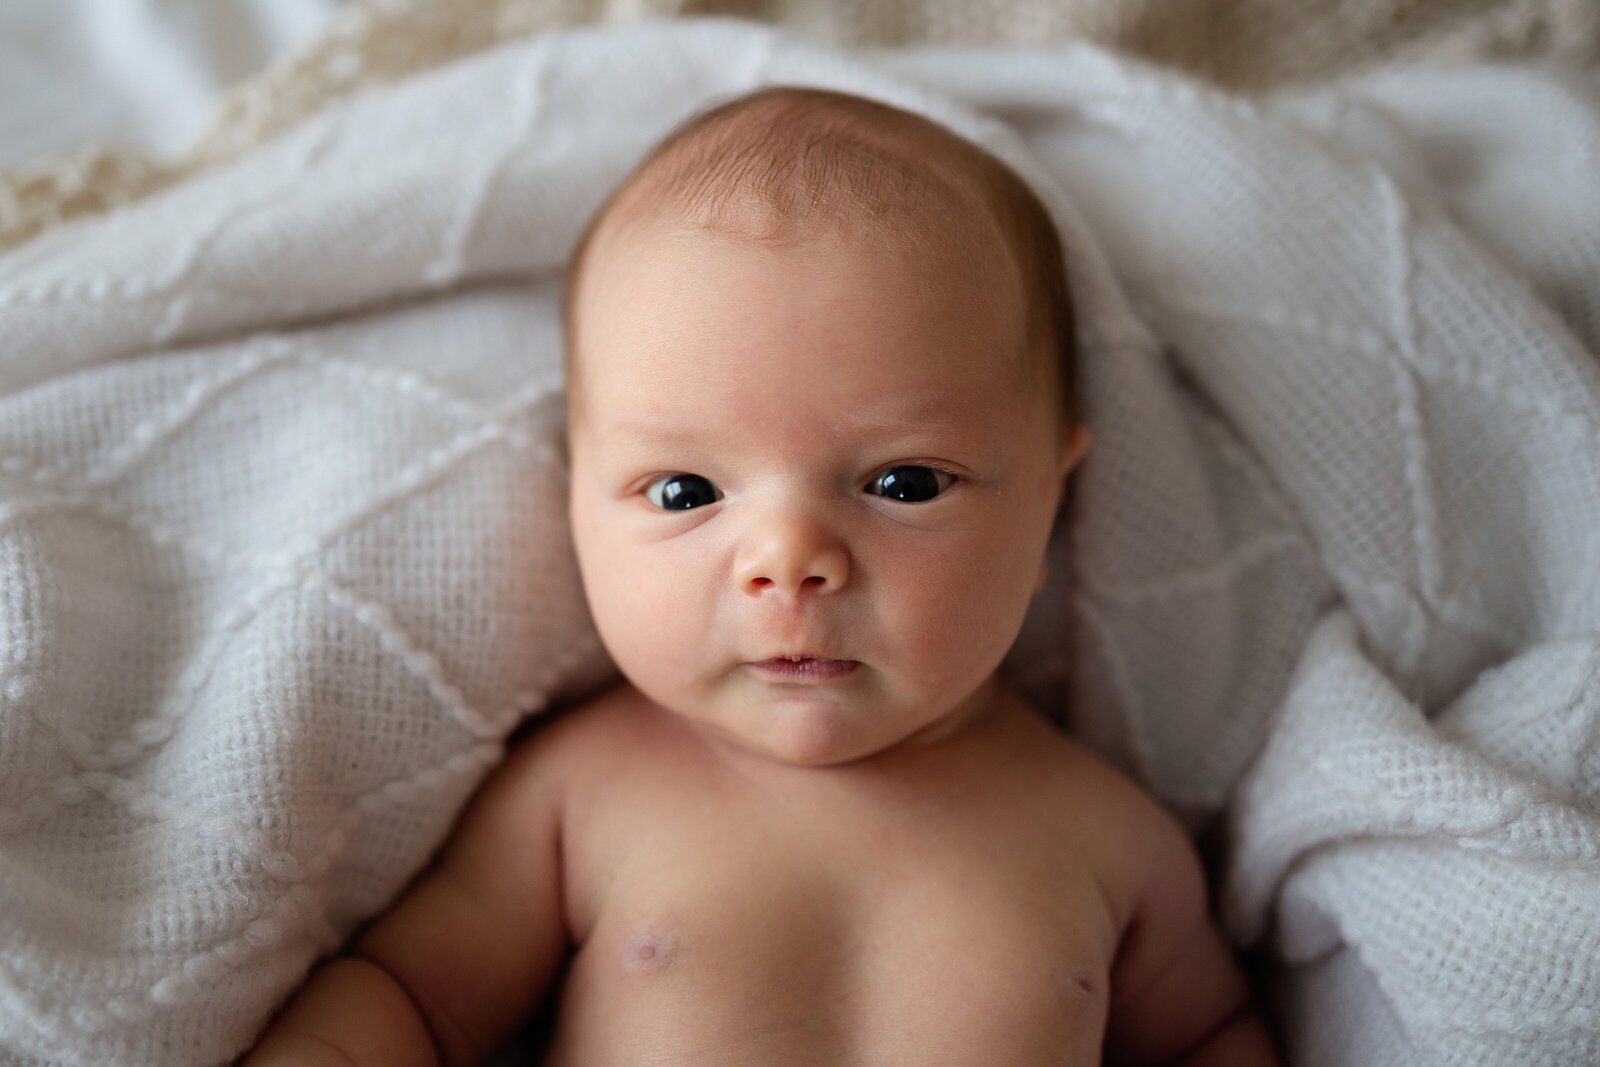 Newborn baby boy  looks at the camera with eyes wide open